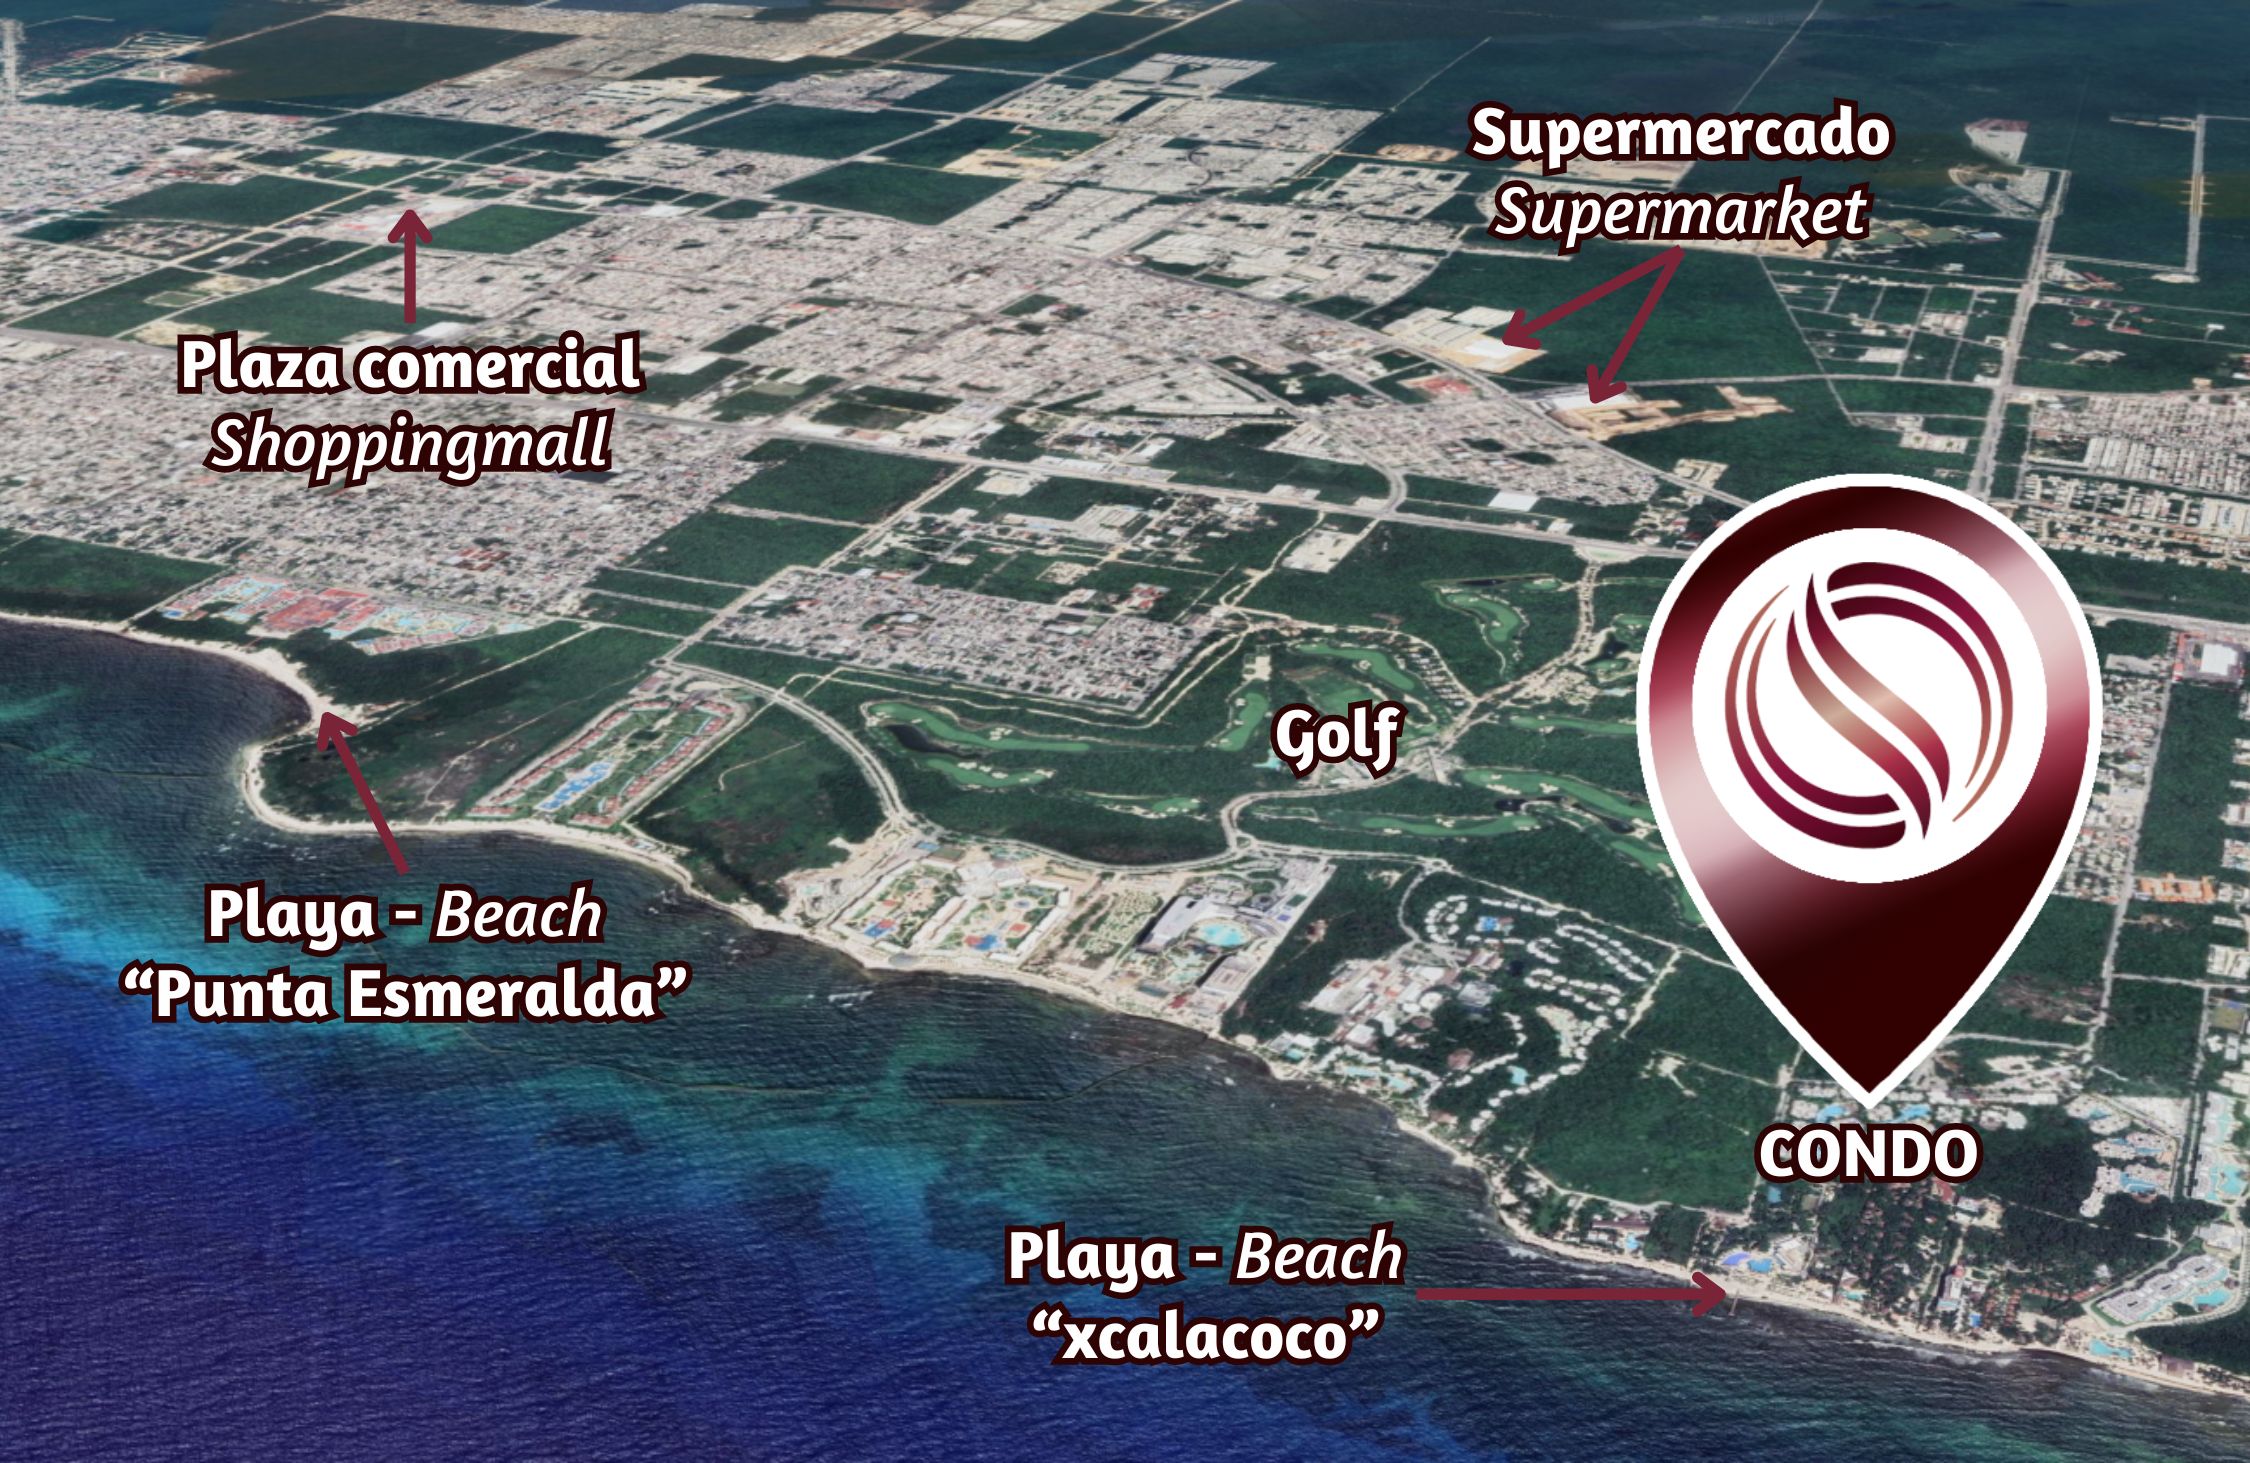 Condo with more than 15 amenities in pre-construction for sale Playa del Carmen